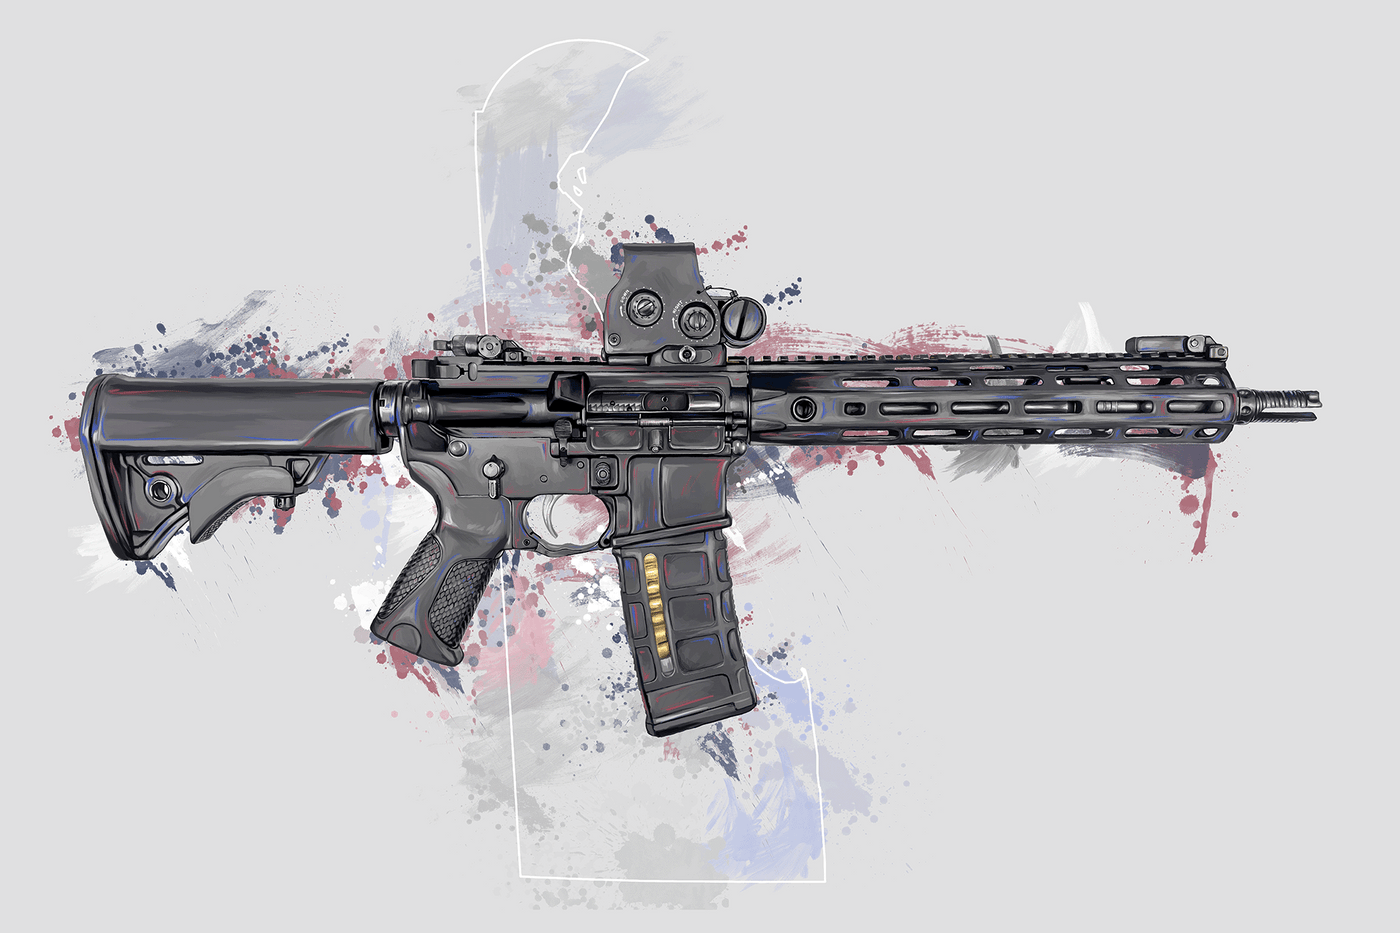 Defending Freedom - Delaware - AR-15 State Painting